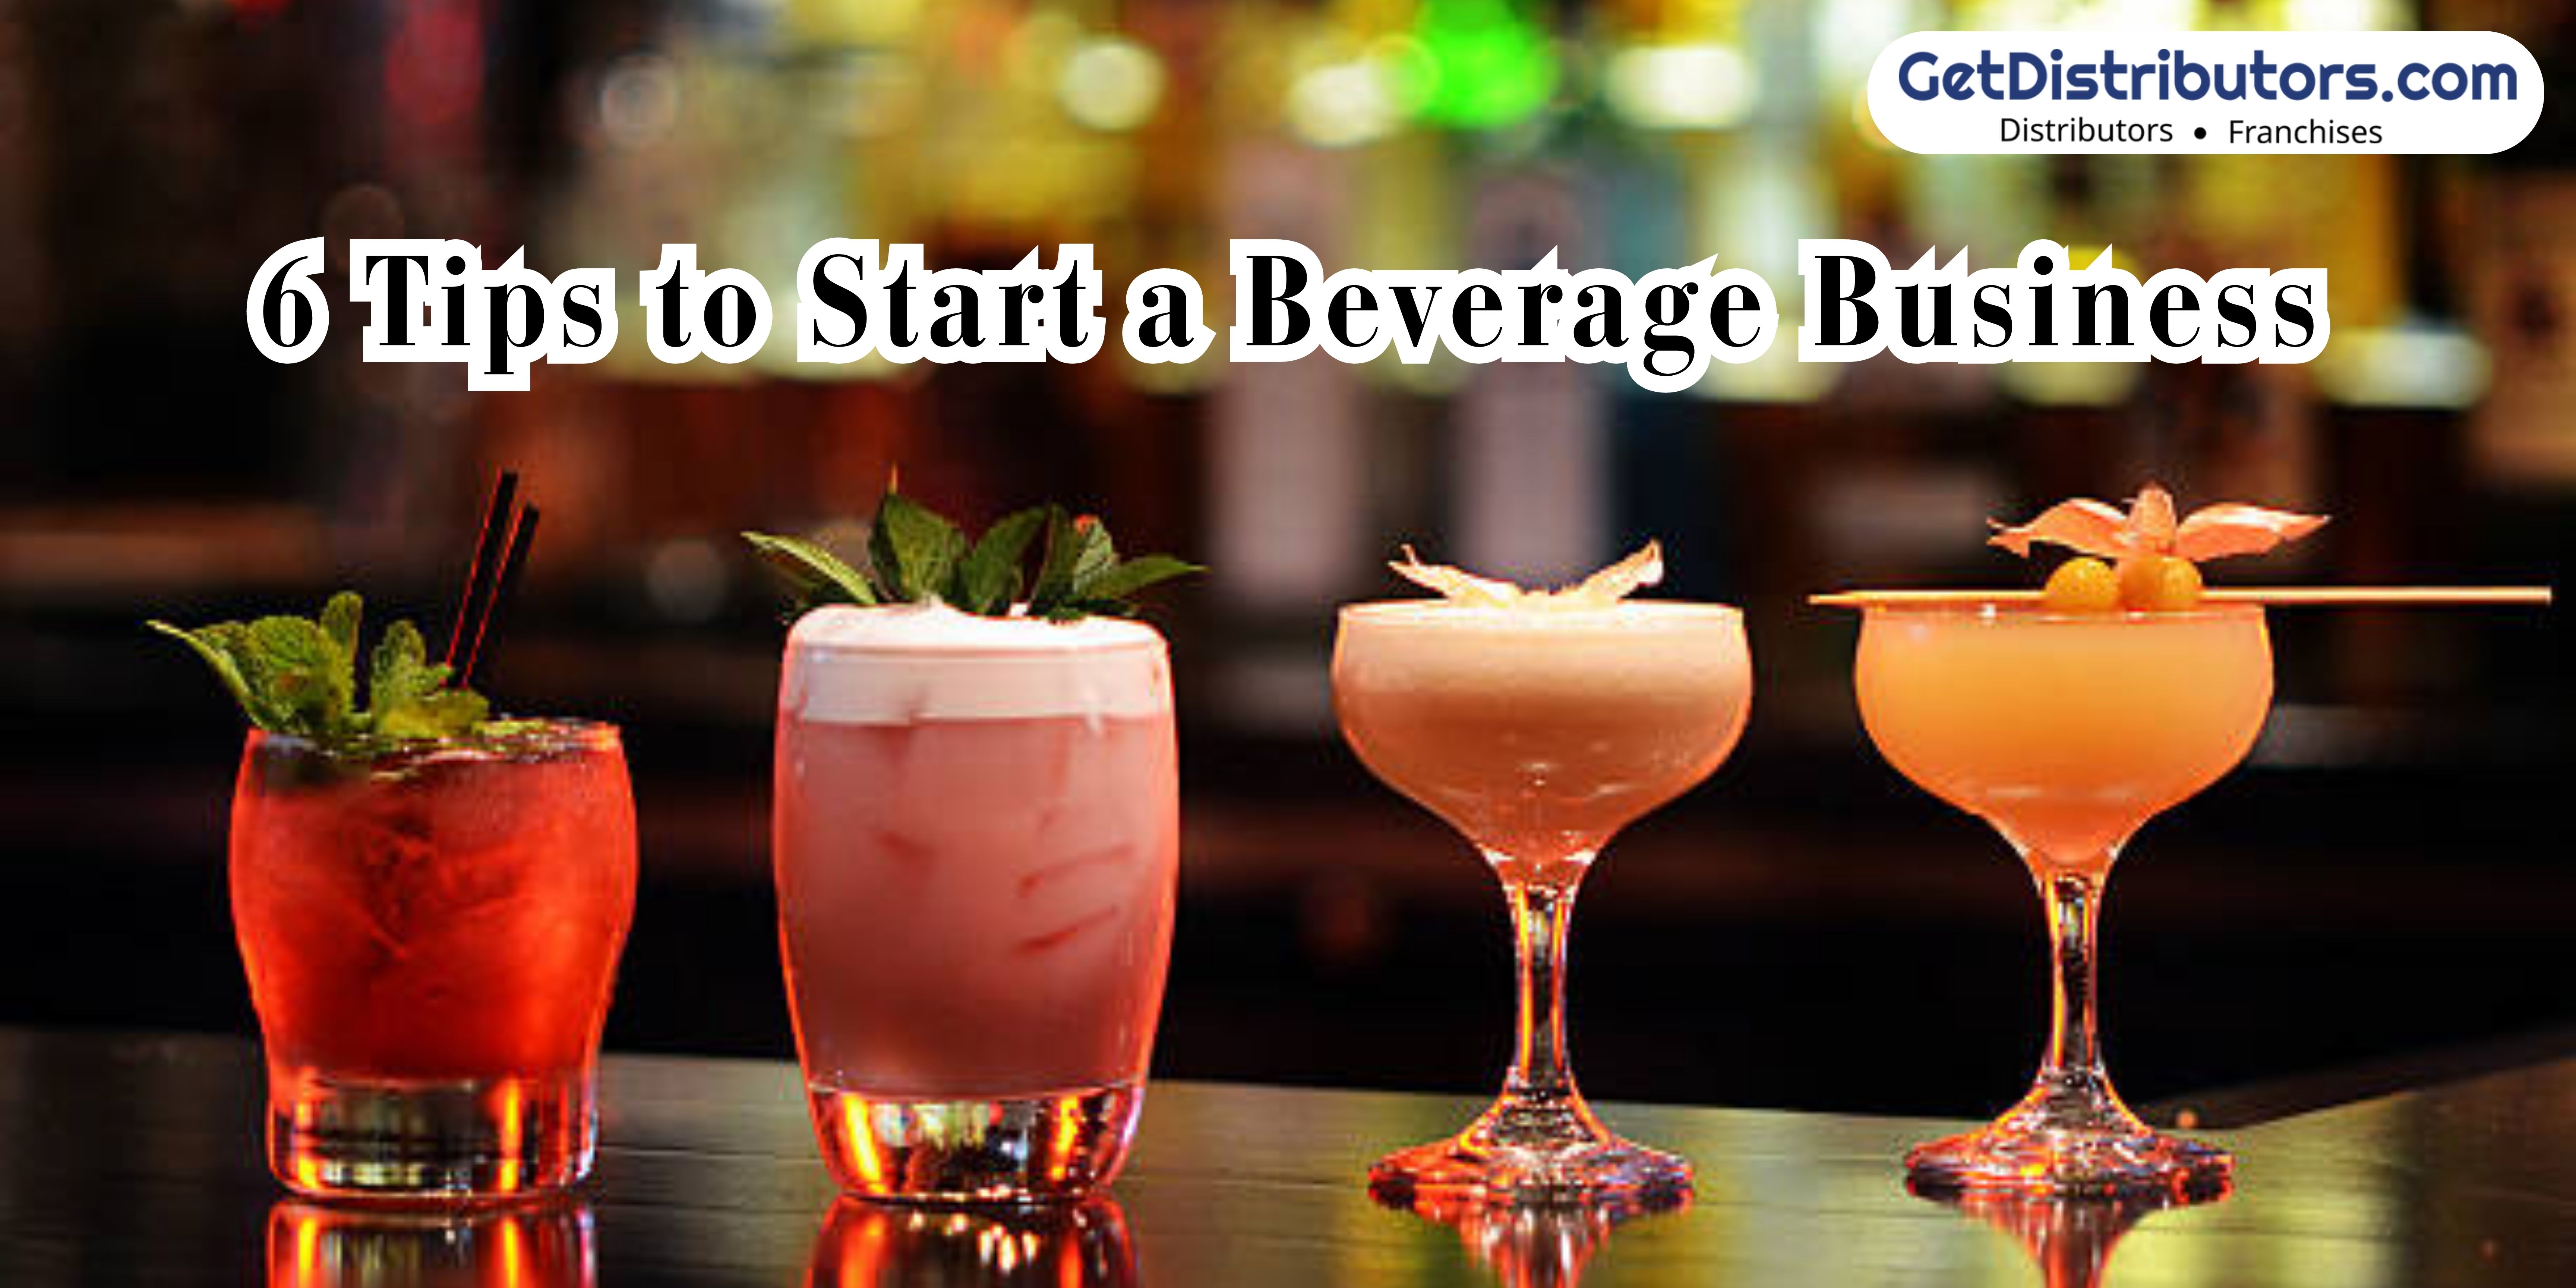 6 Tips to Start a Beverage Business